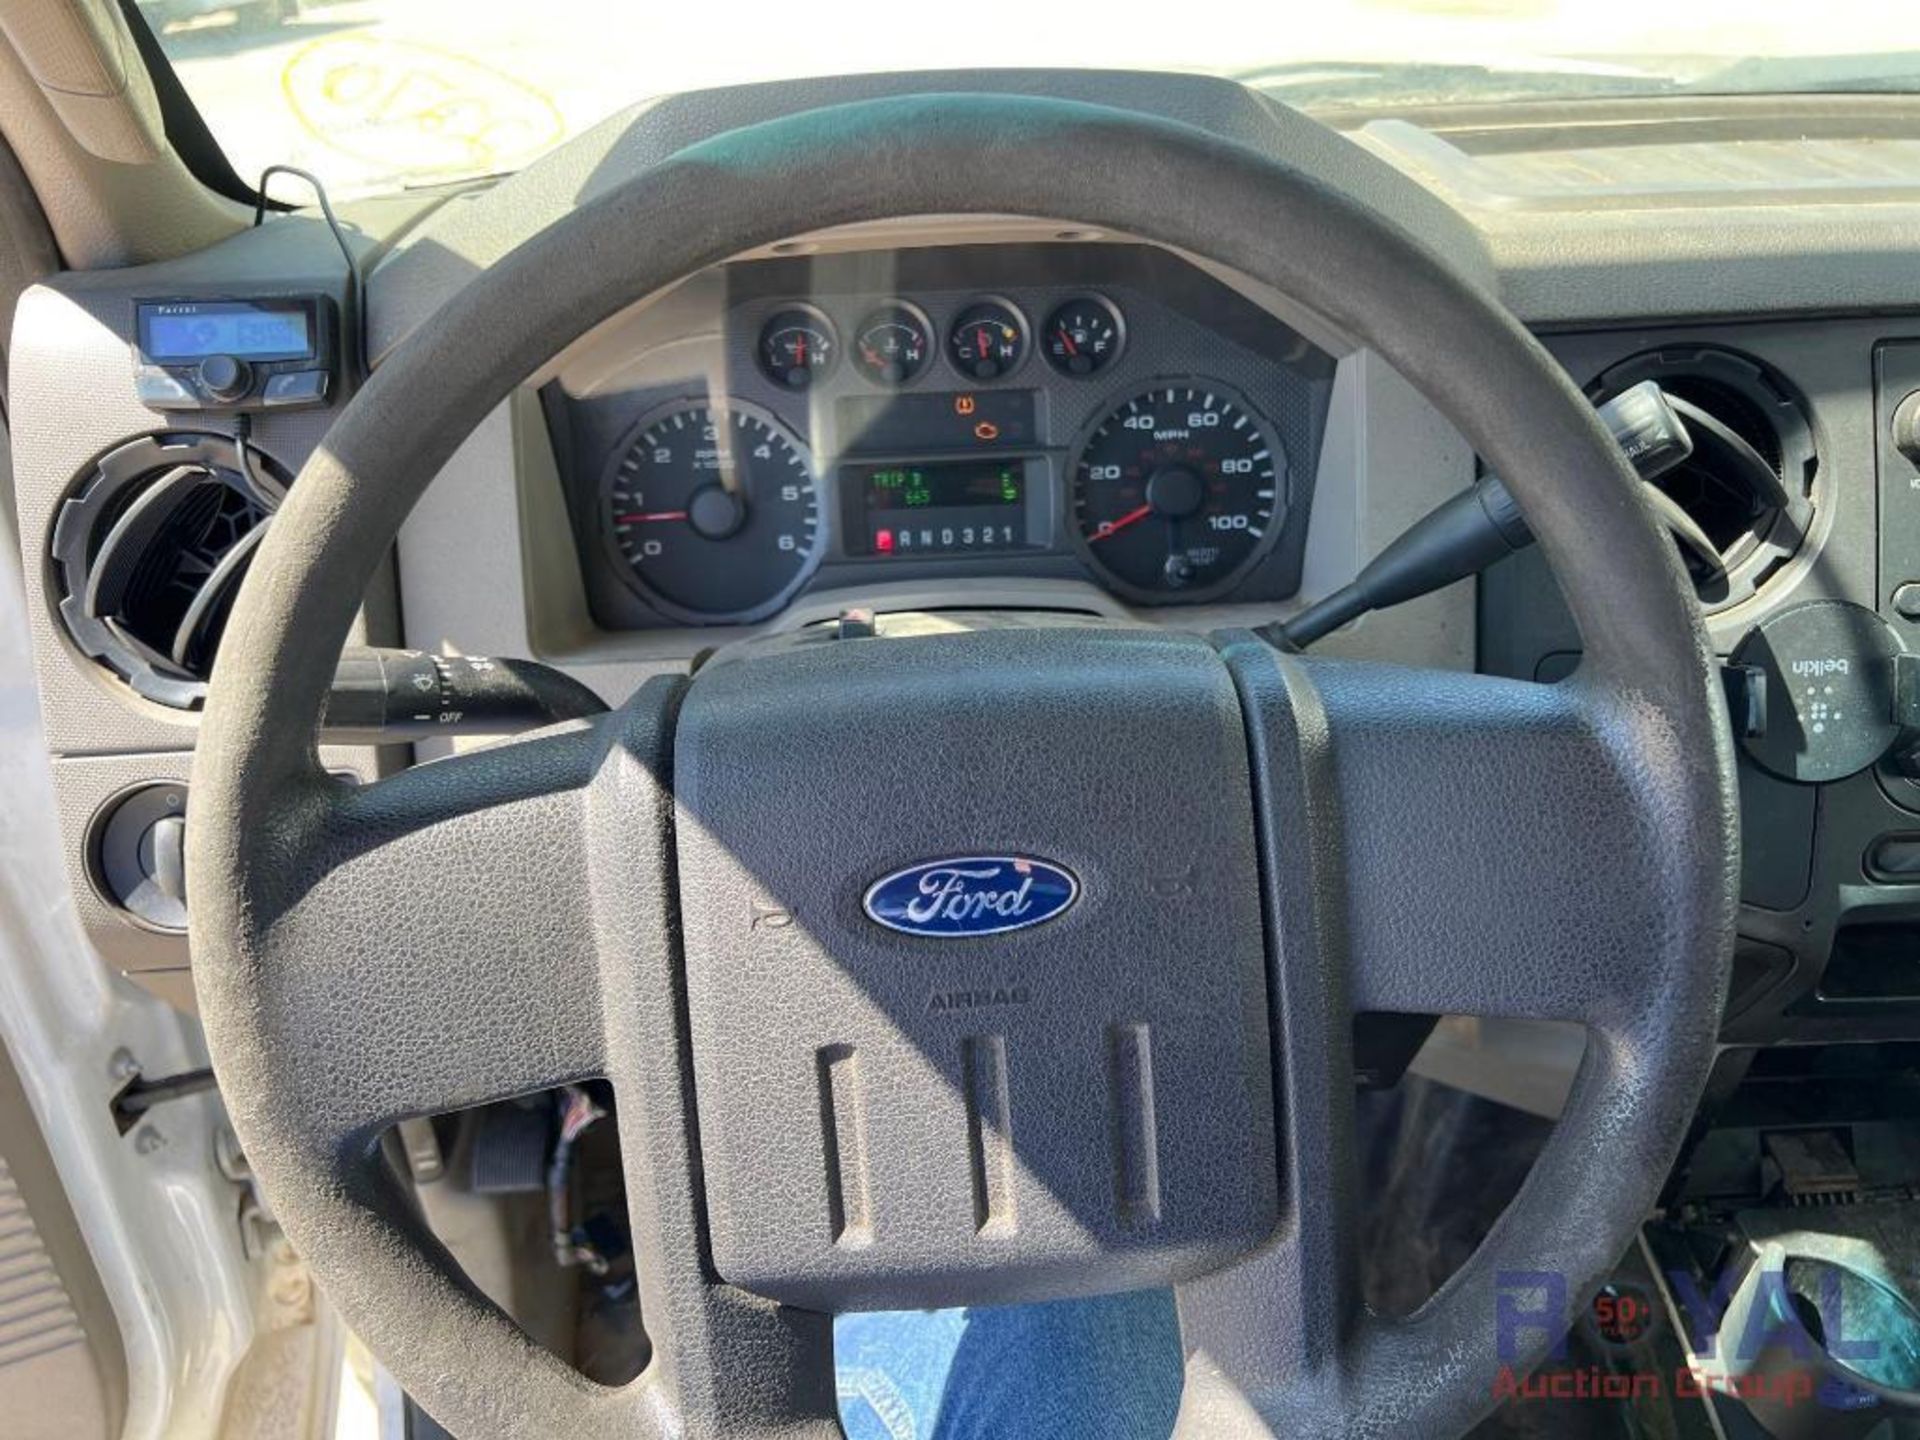 2008 Ford F250 Service Truck - Image 19 of 40